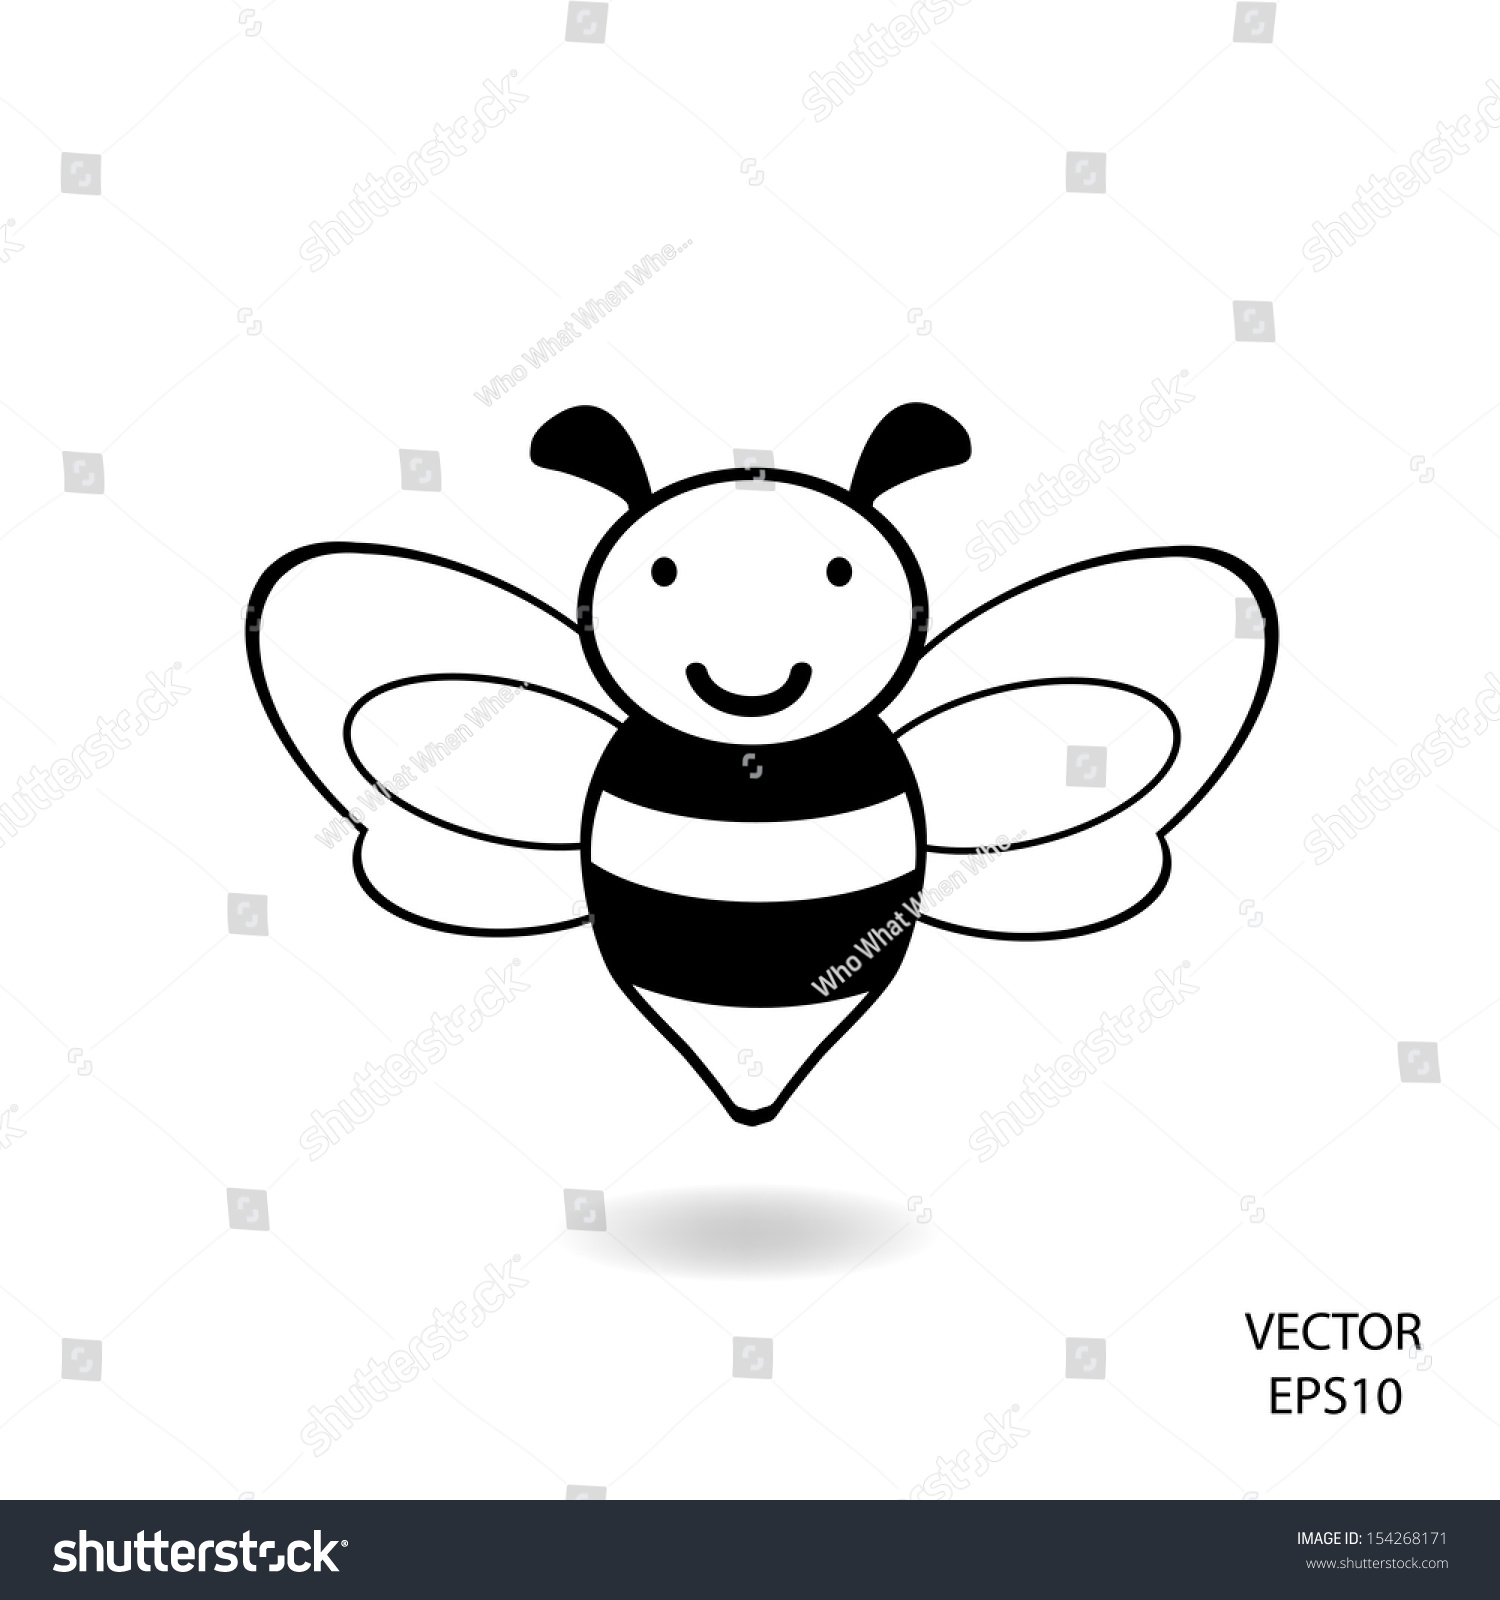 Bee Icon,Vector,Bee Drawing - 154268171 : Shutterstock